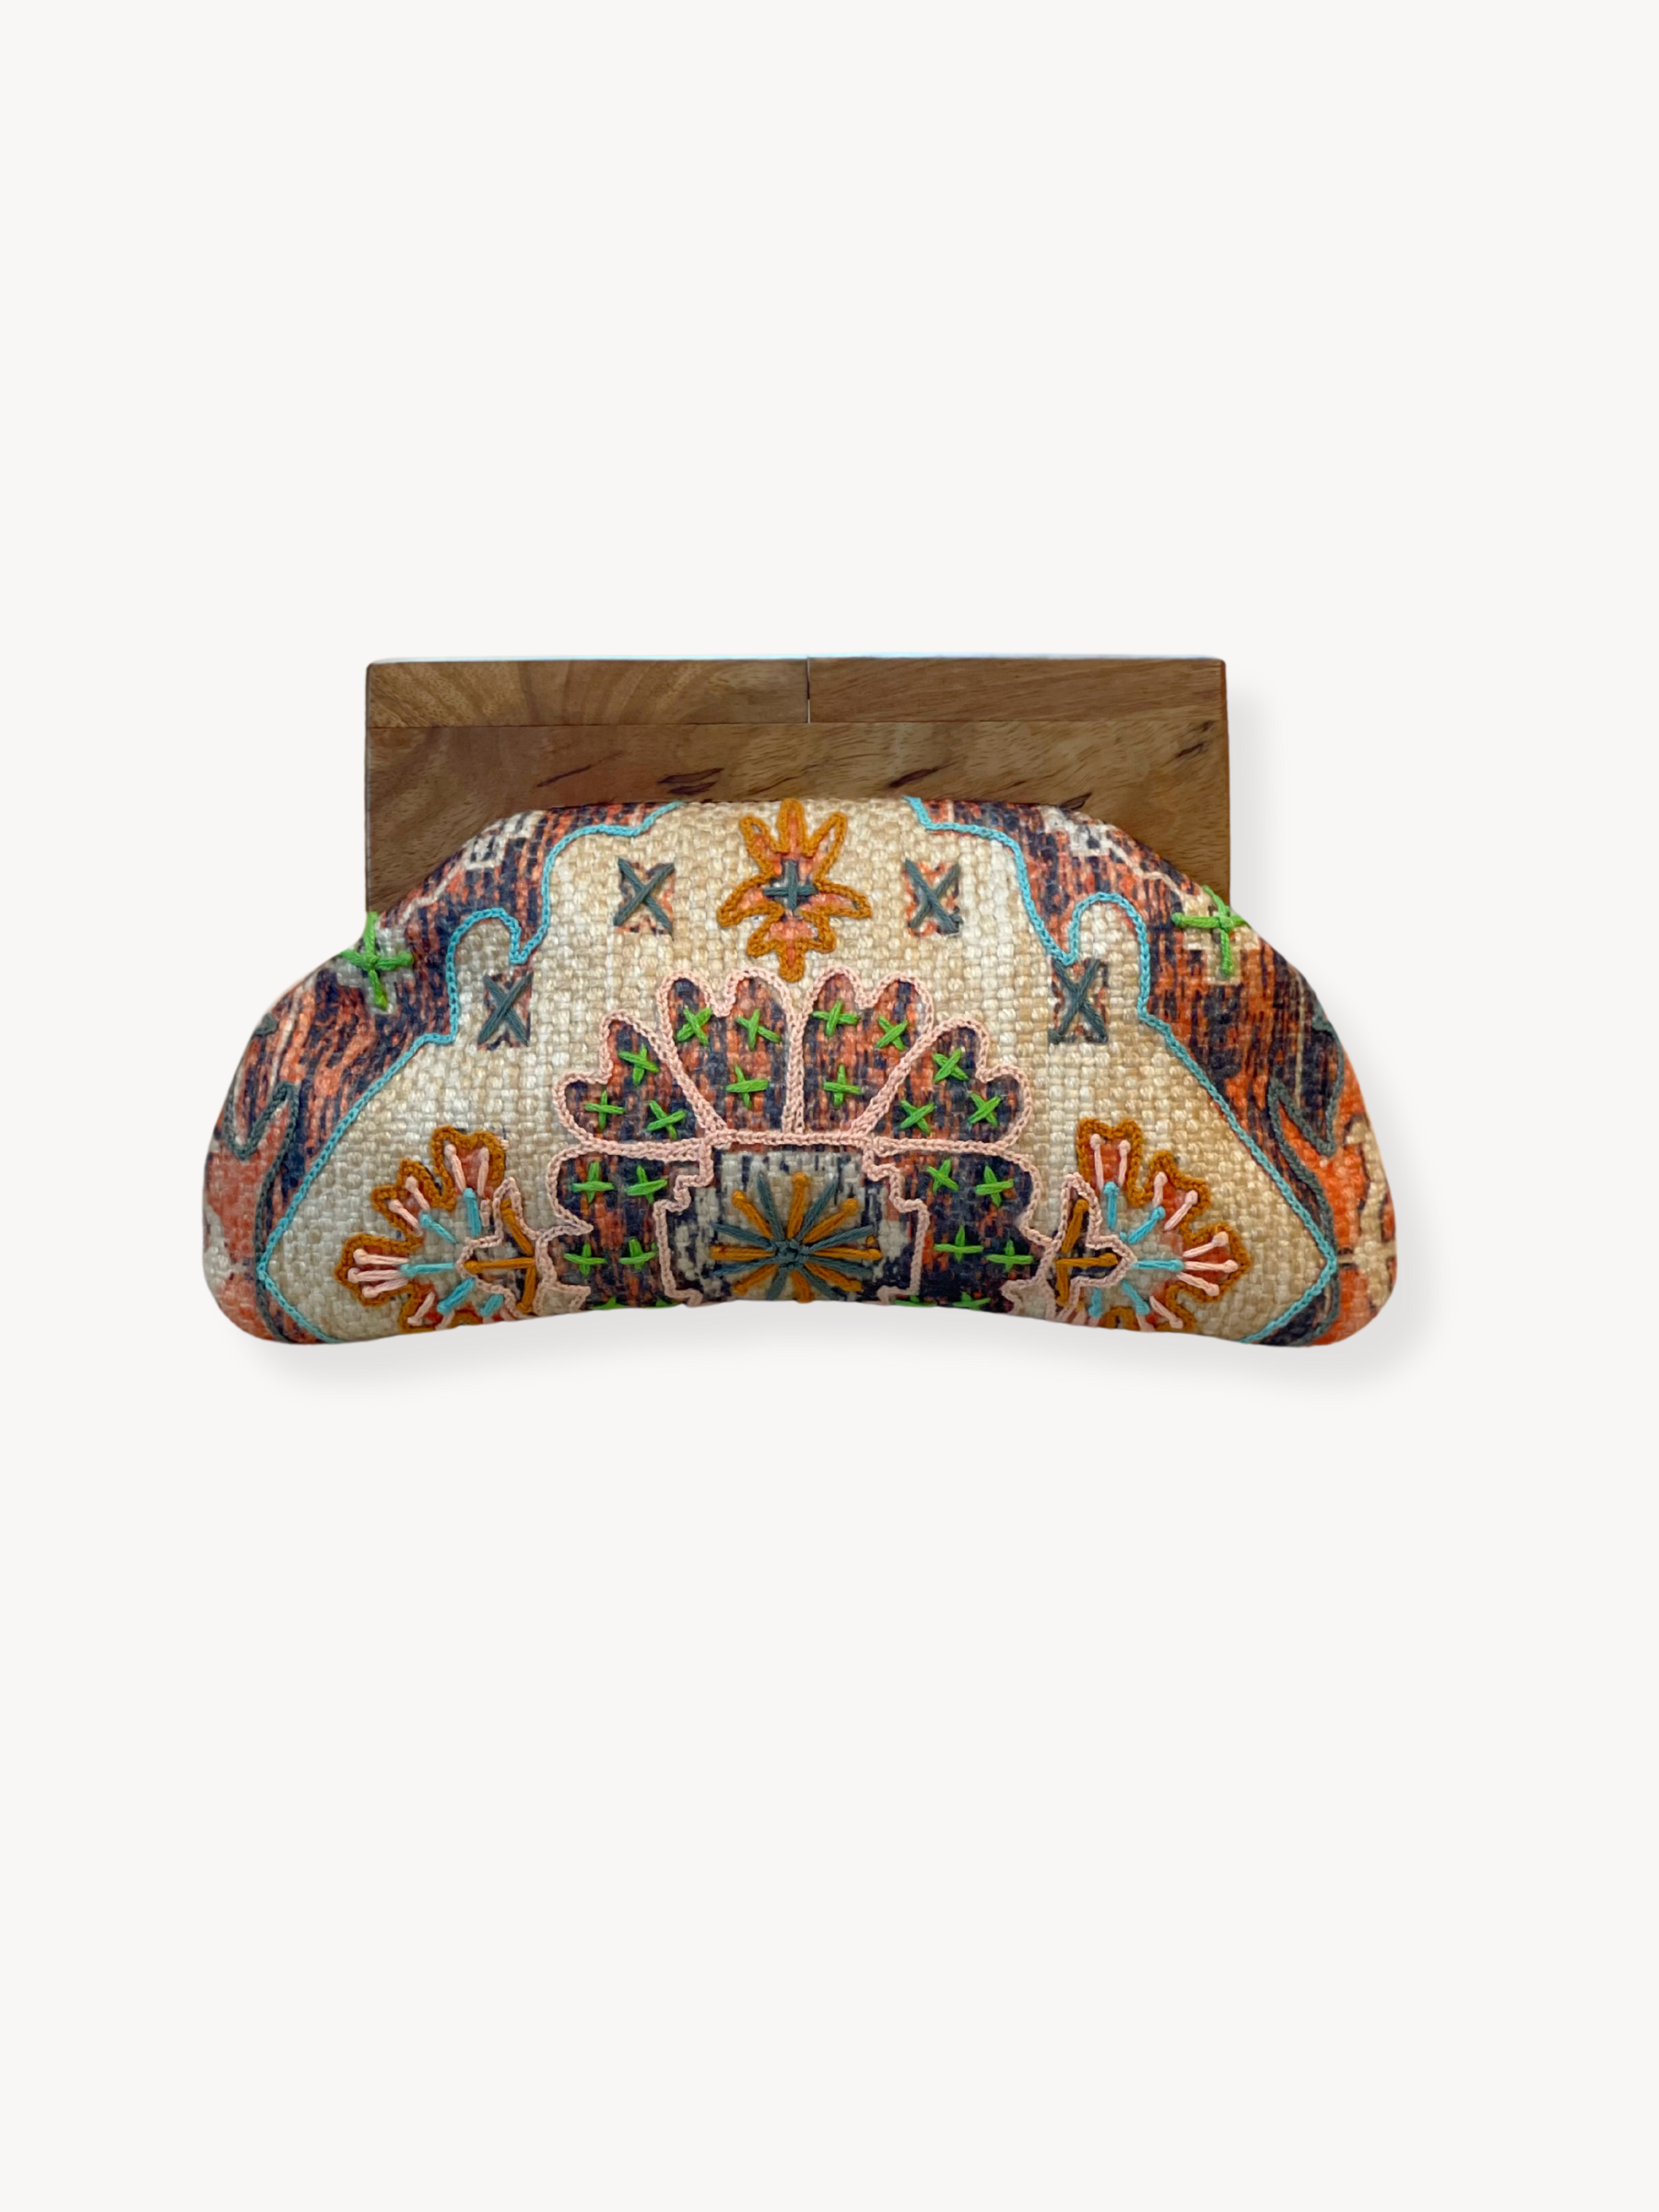 GOLDxTEAL gorgeous handmade embroidered clutch with wooden handle.